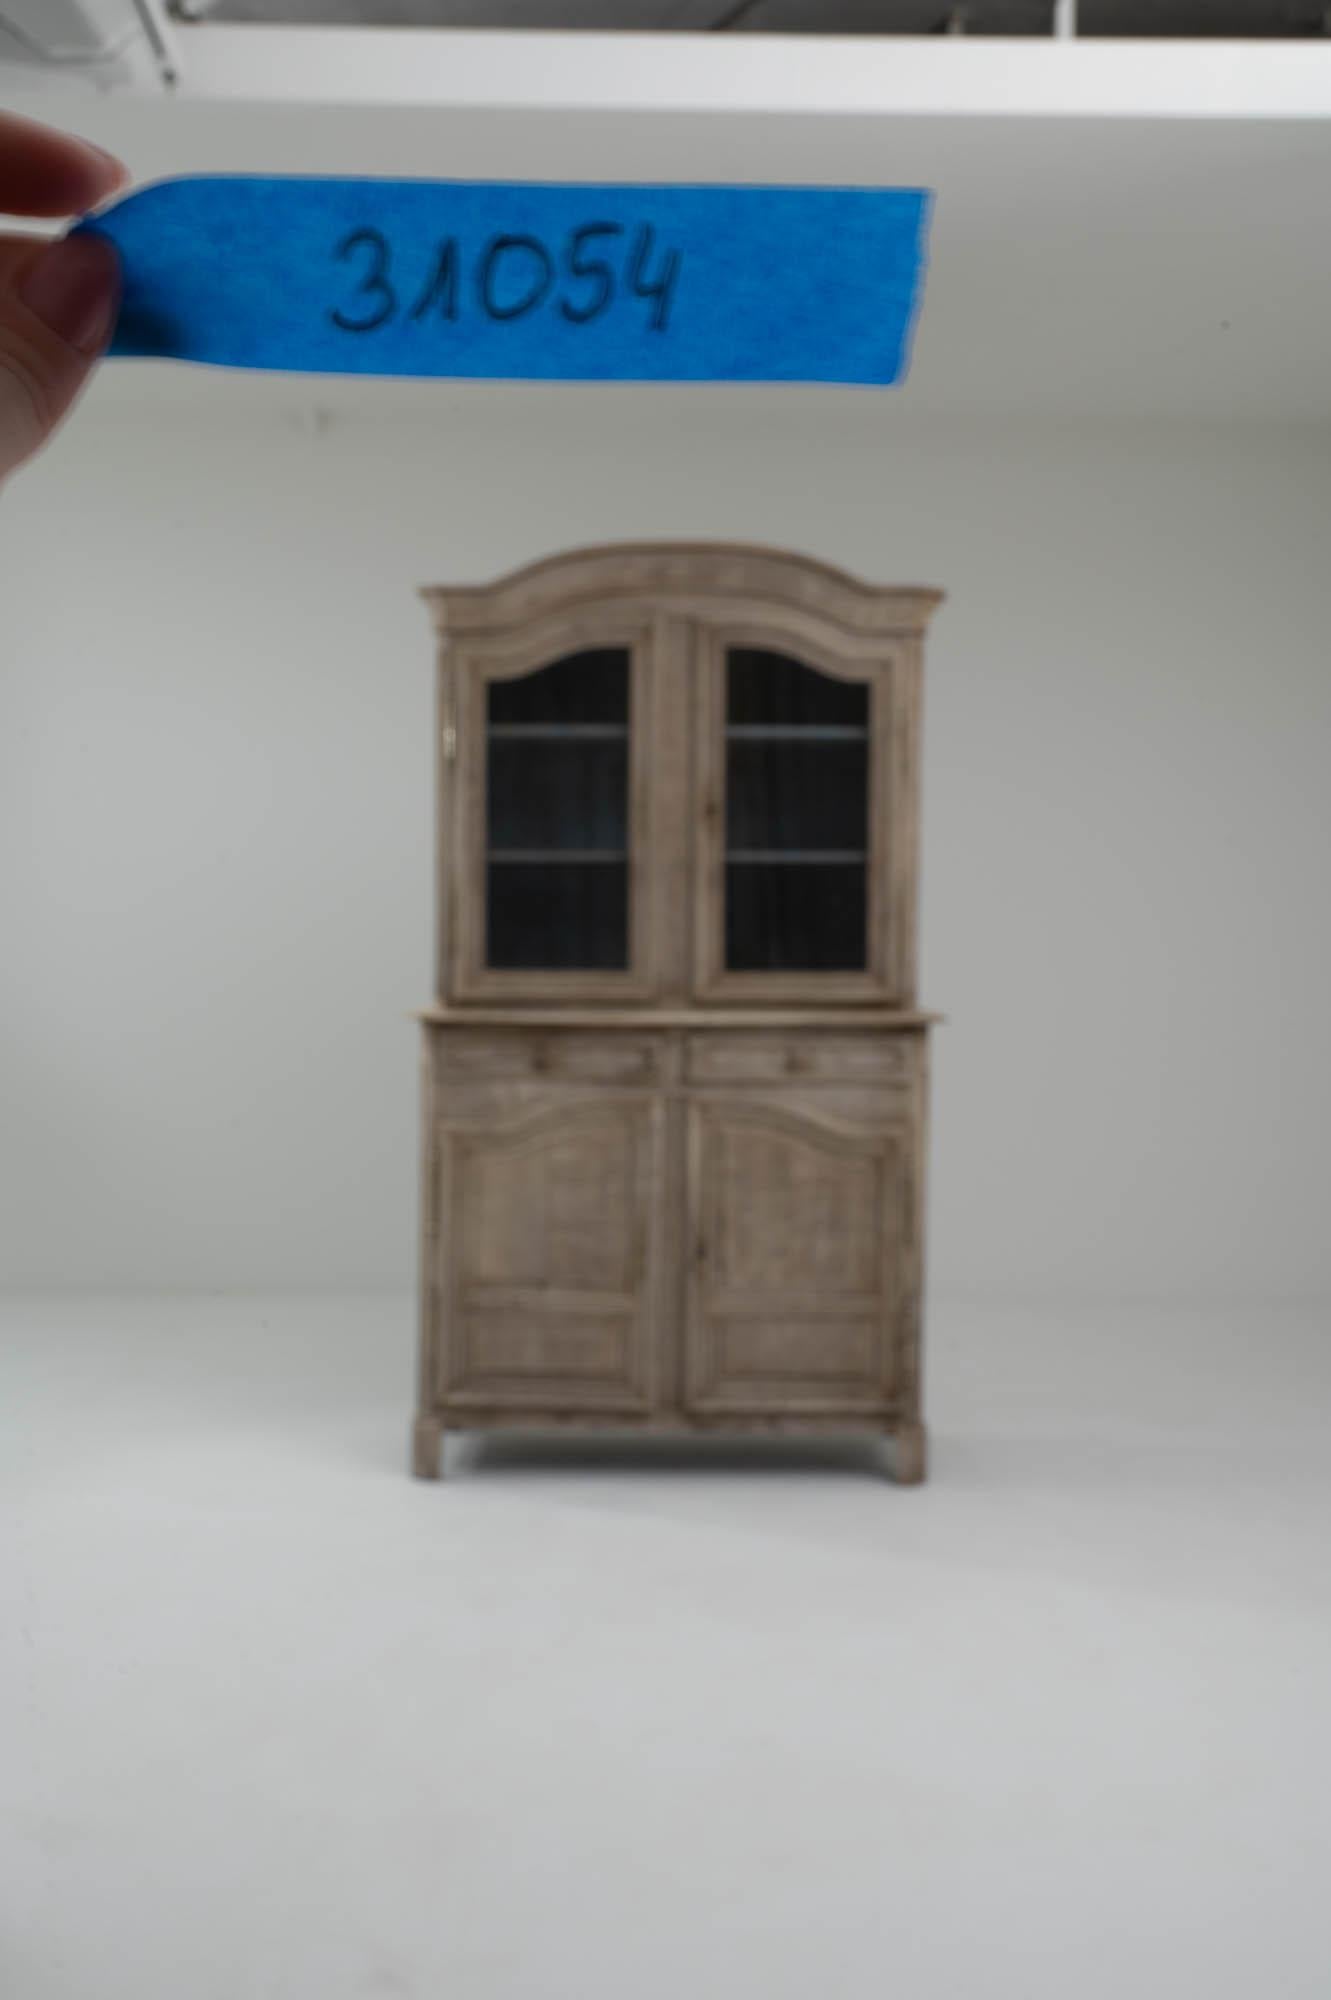 This antique Provincial vitrine in natural oak combines elegance with country simplicity. Made in France in the 1800s, the gentle arch of the cornice is echoed in the shape of the lower cupboard doors to form a harmonious composition. The windows of